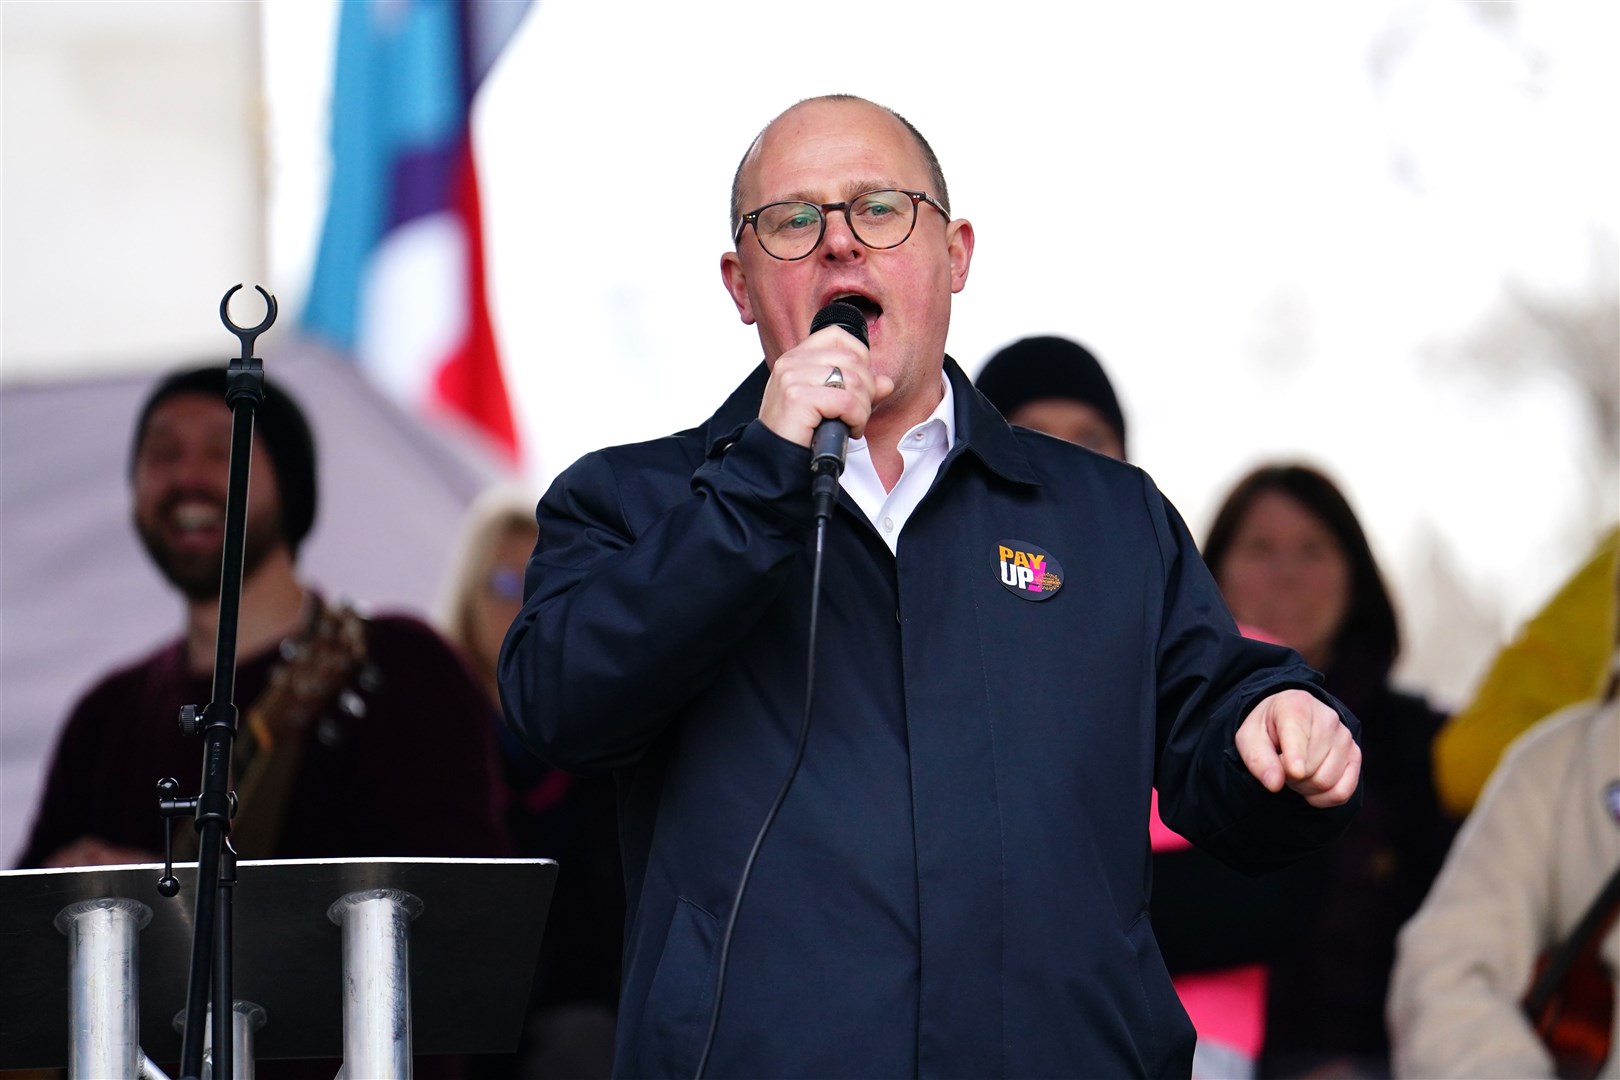 Paul Nowak, general secretary of the Trades Union Congress (TUC) speaks at a rally by striking members of the National Education Union (NEU) in Westminster (Jordan Pettitt/PA)